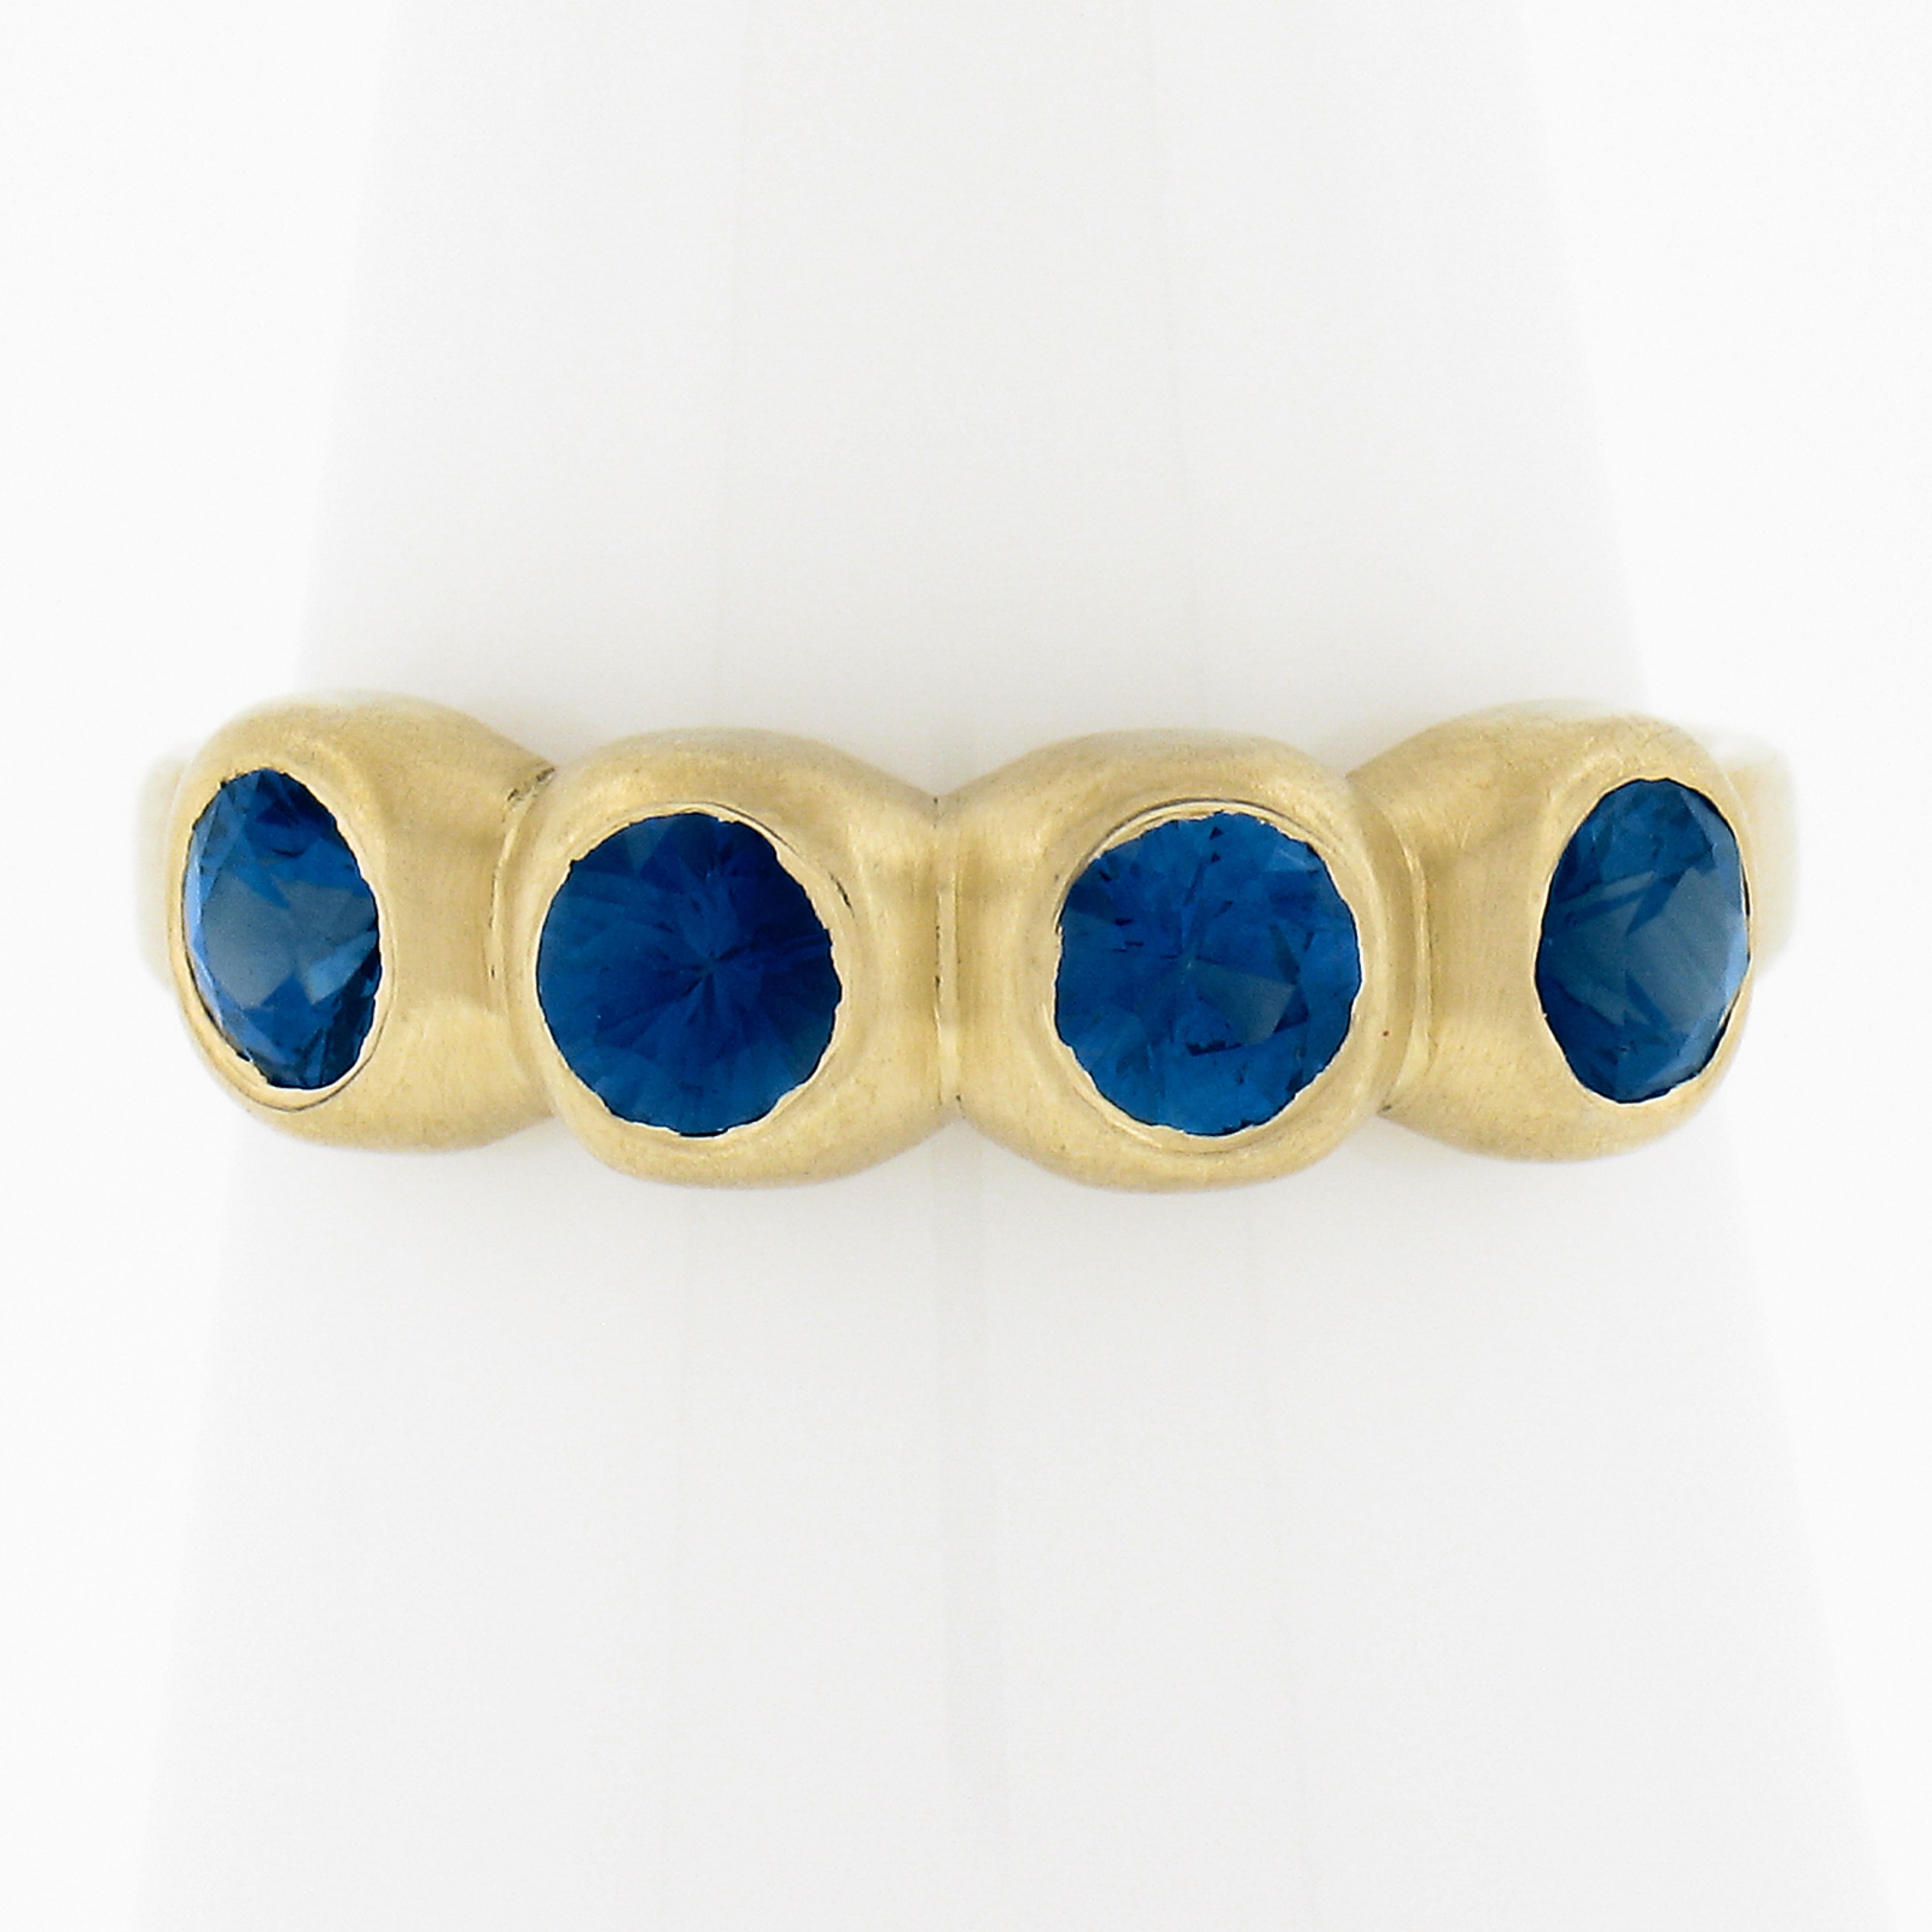 --Stone(s):--
(4) Natural Genuine Sapphires - Round Brilliant Cut - Bezel Set - Lively Bright Brilliant Blue Color 
Total Carat Weight:	1.20-1.40 (approx.)

Material: Solid 18K Yellow Gold
Weight: 3.85 Grams
Ring Size: 7.5 (Fitted on a finger. We